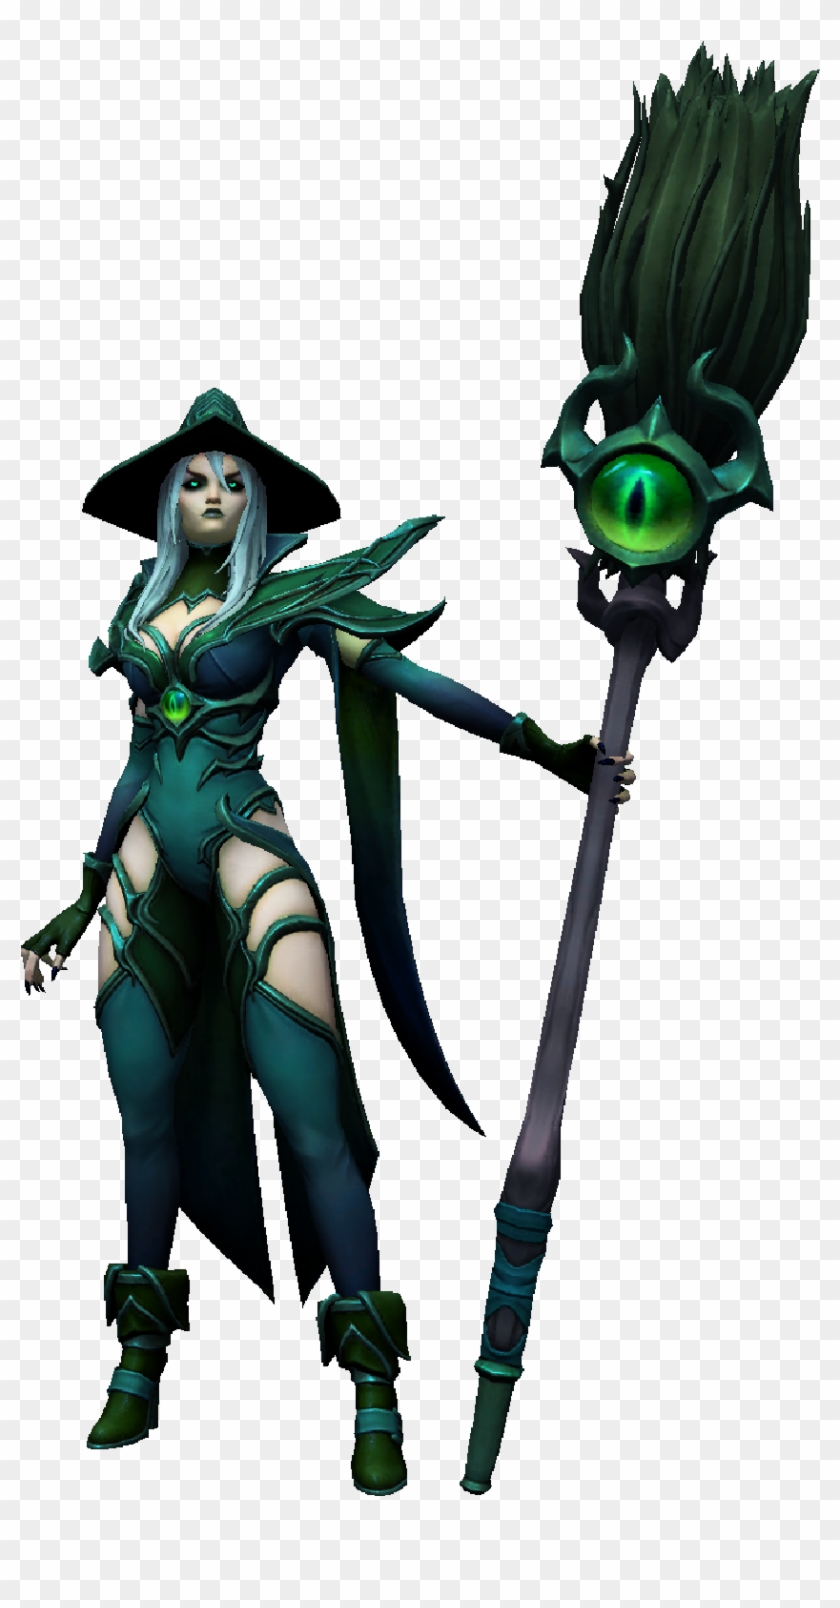 Whitemane Cursed Witch Variant 2 - Heroes Of The Storm Whitemane Witch Clipart #4134782